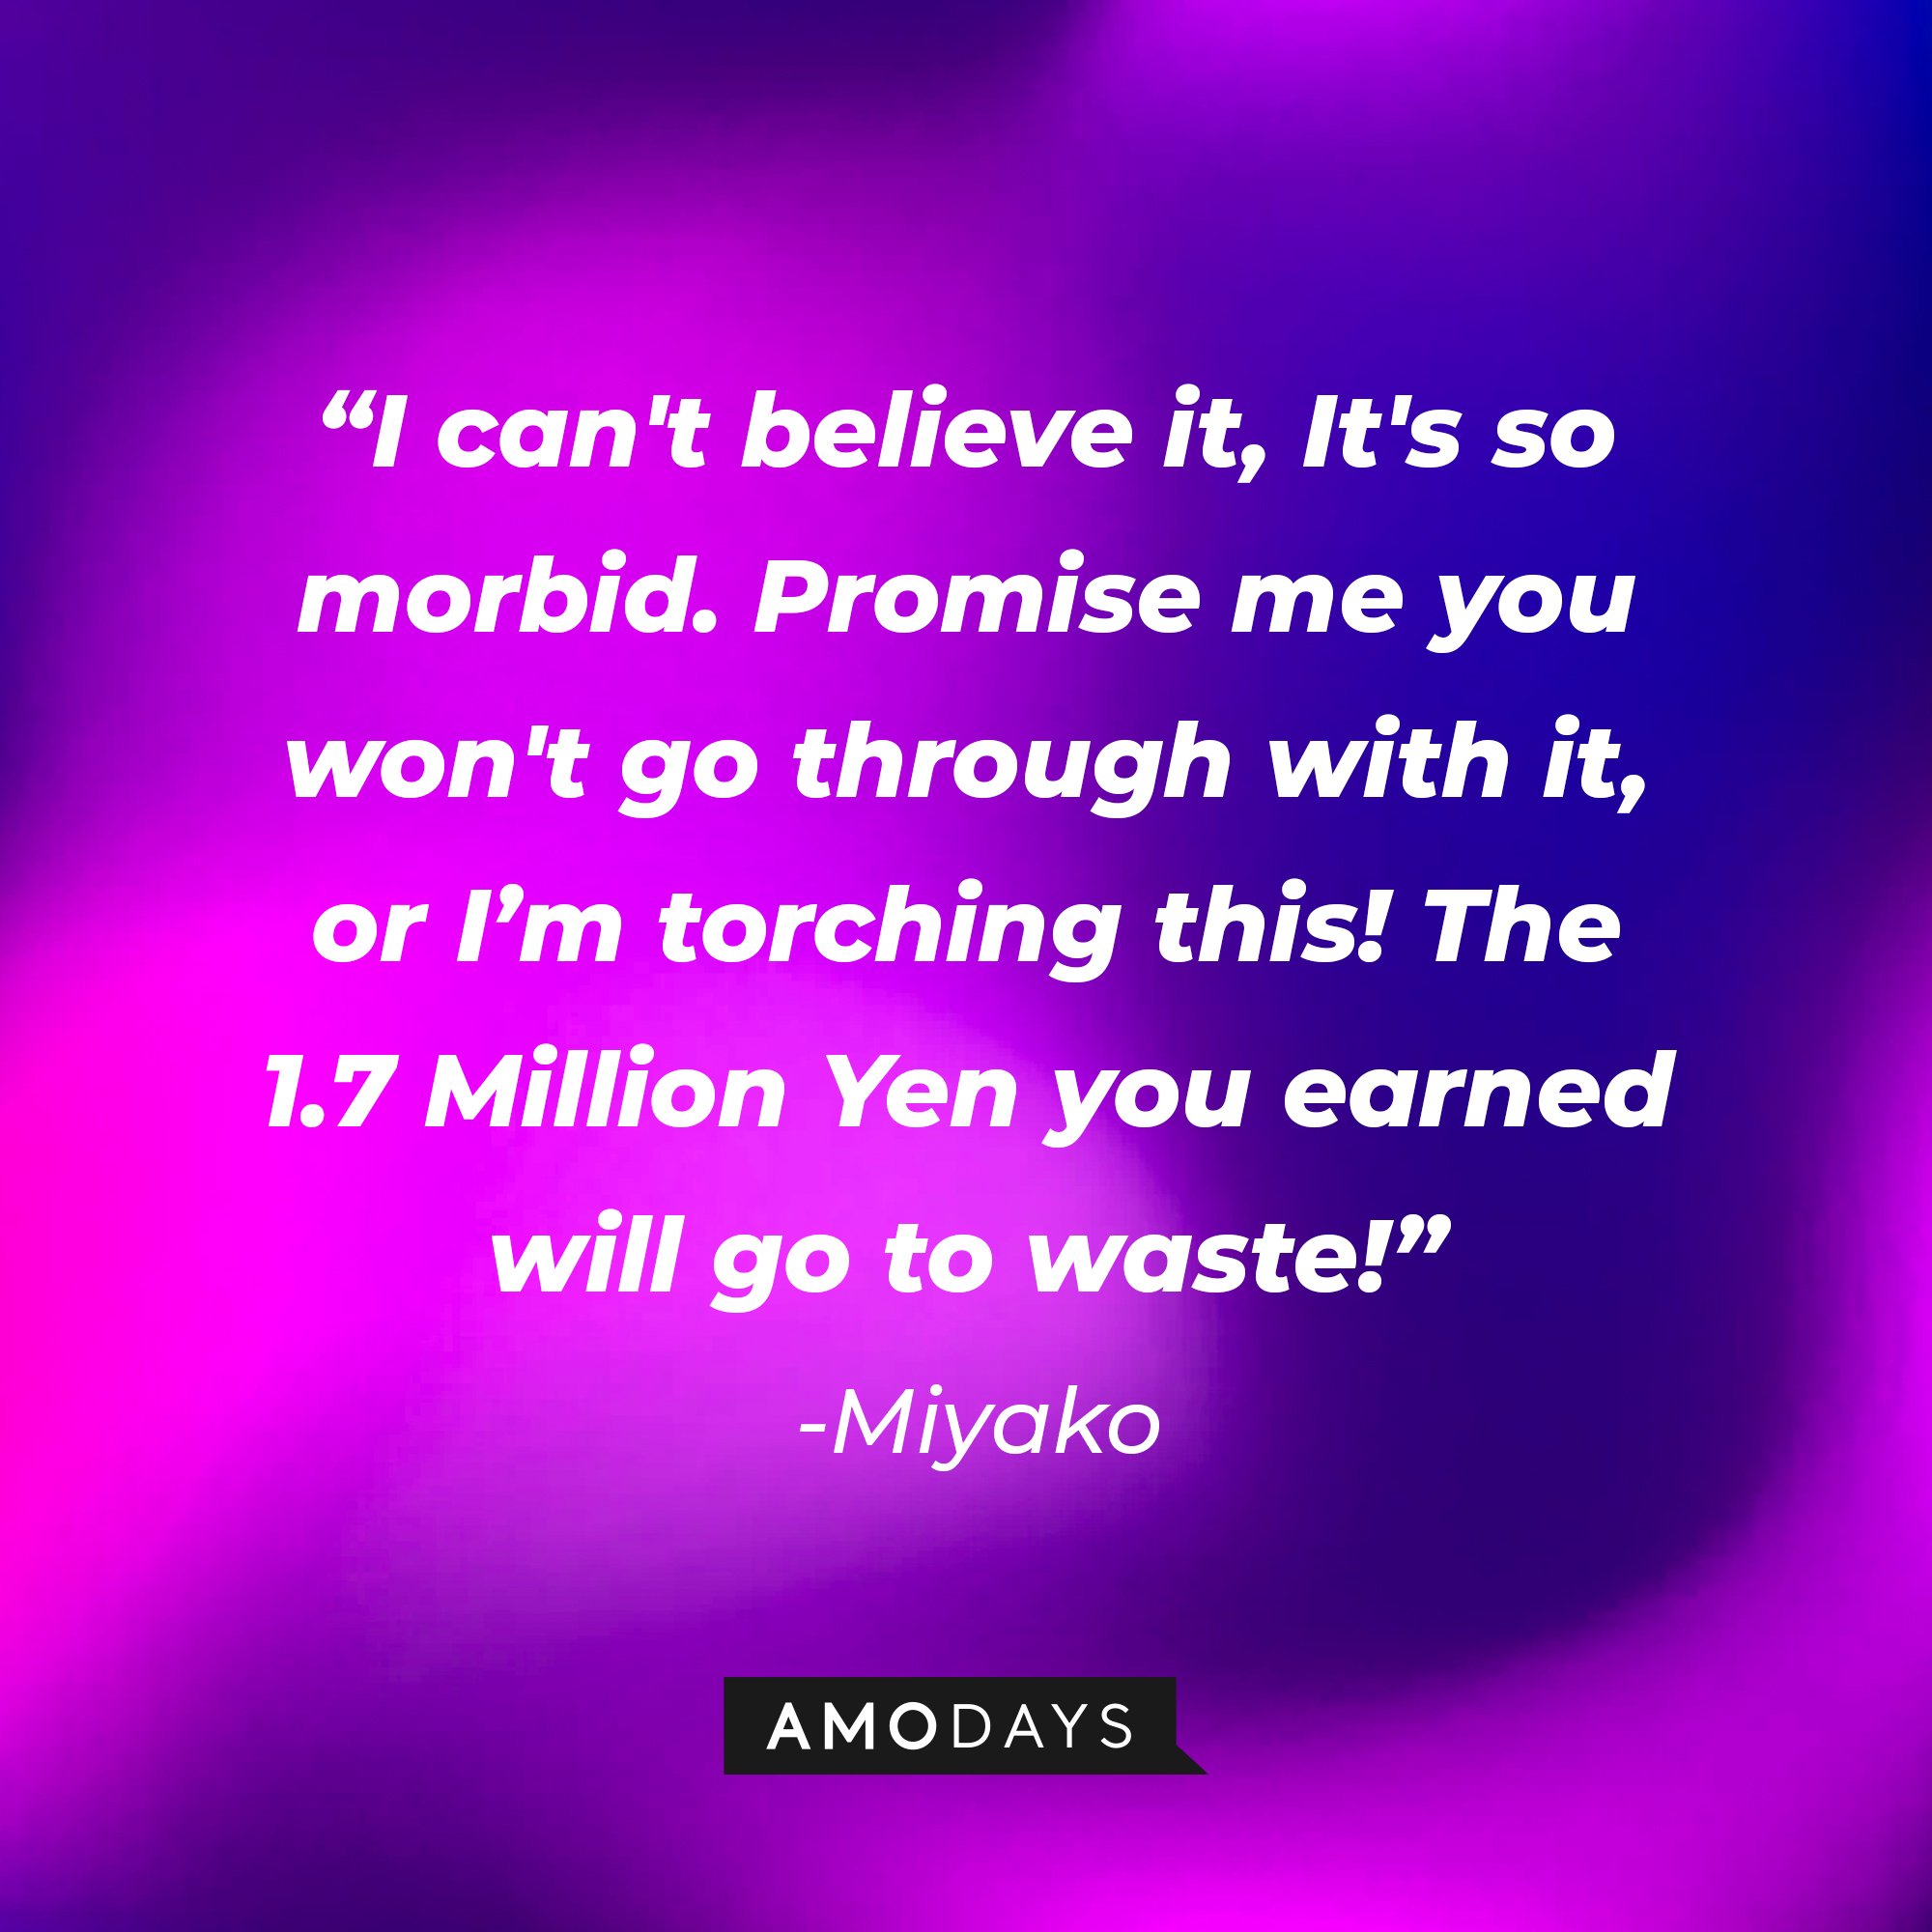 Miyako’s quote: “I can't believe it, It's so morbid. Promise me you won't go through with it, or I’m torching this! The 1.7 Million Yen you earned will go to waste!" | Image: AmoDays 